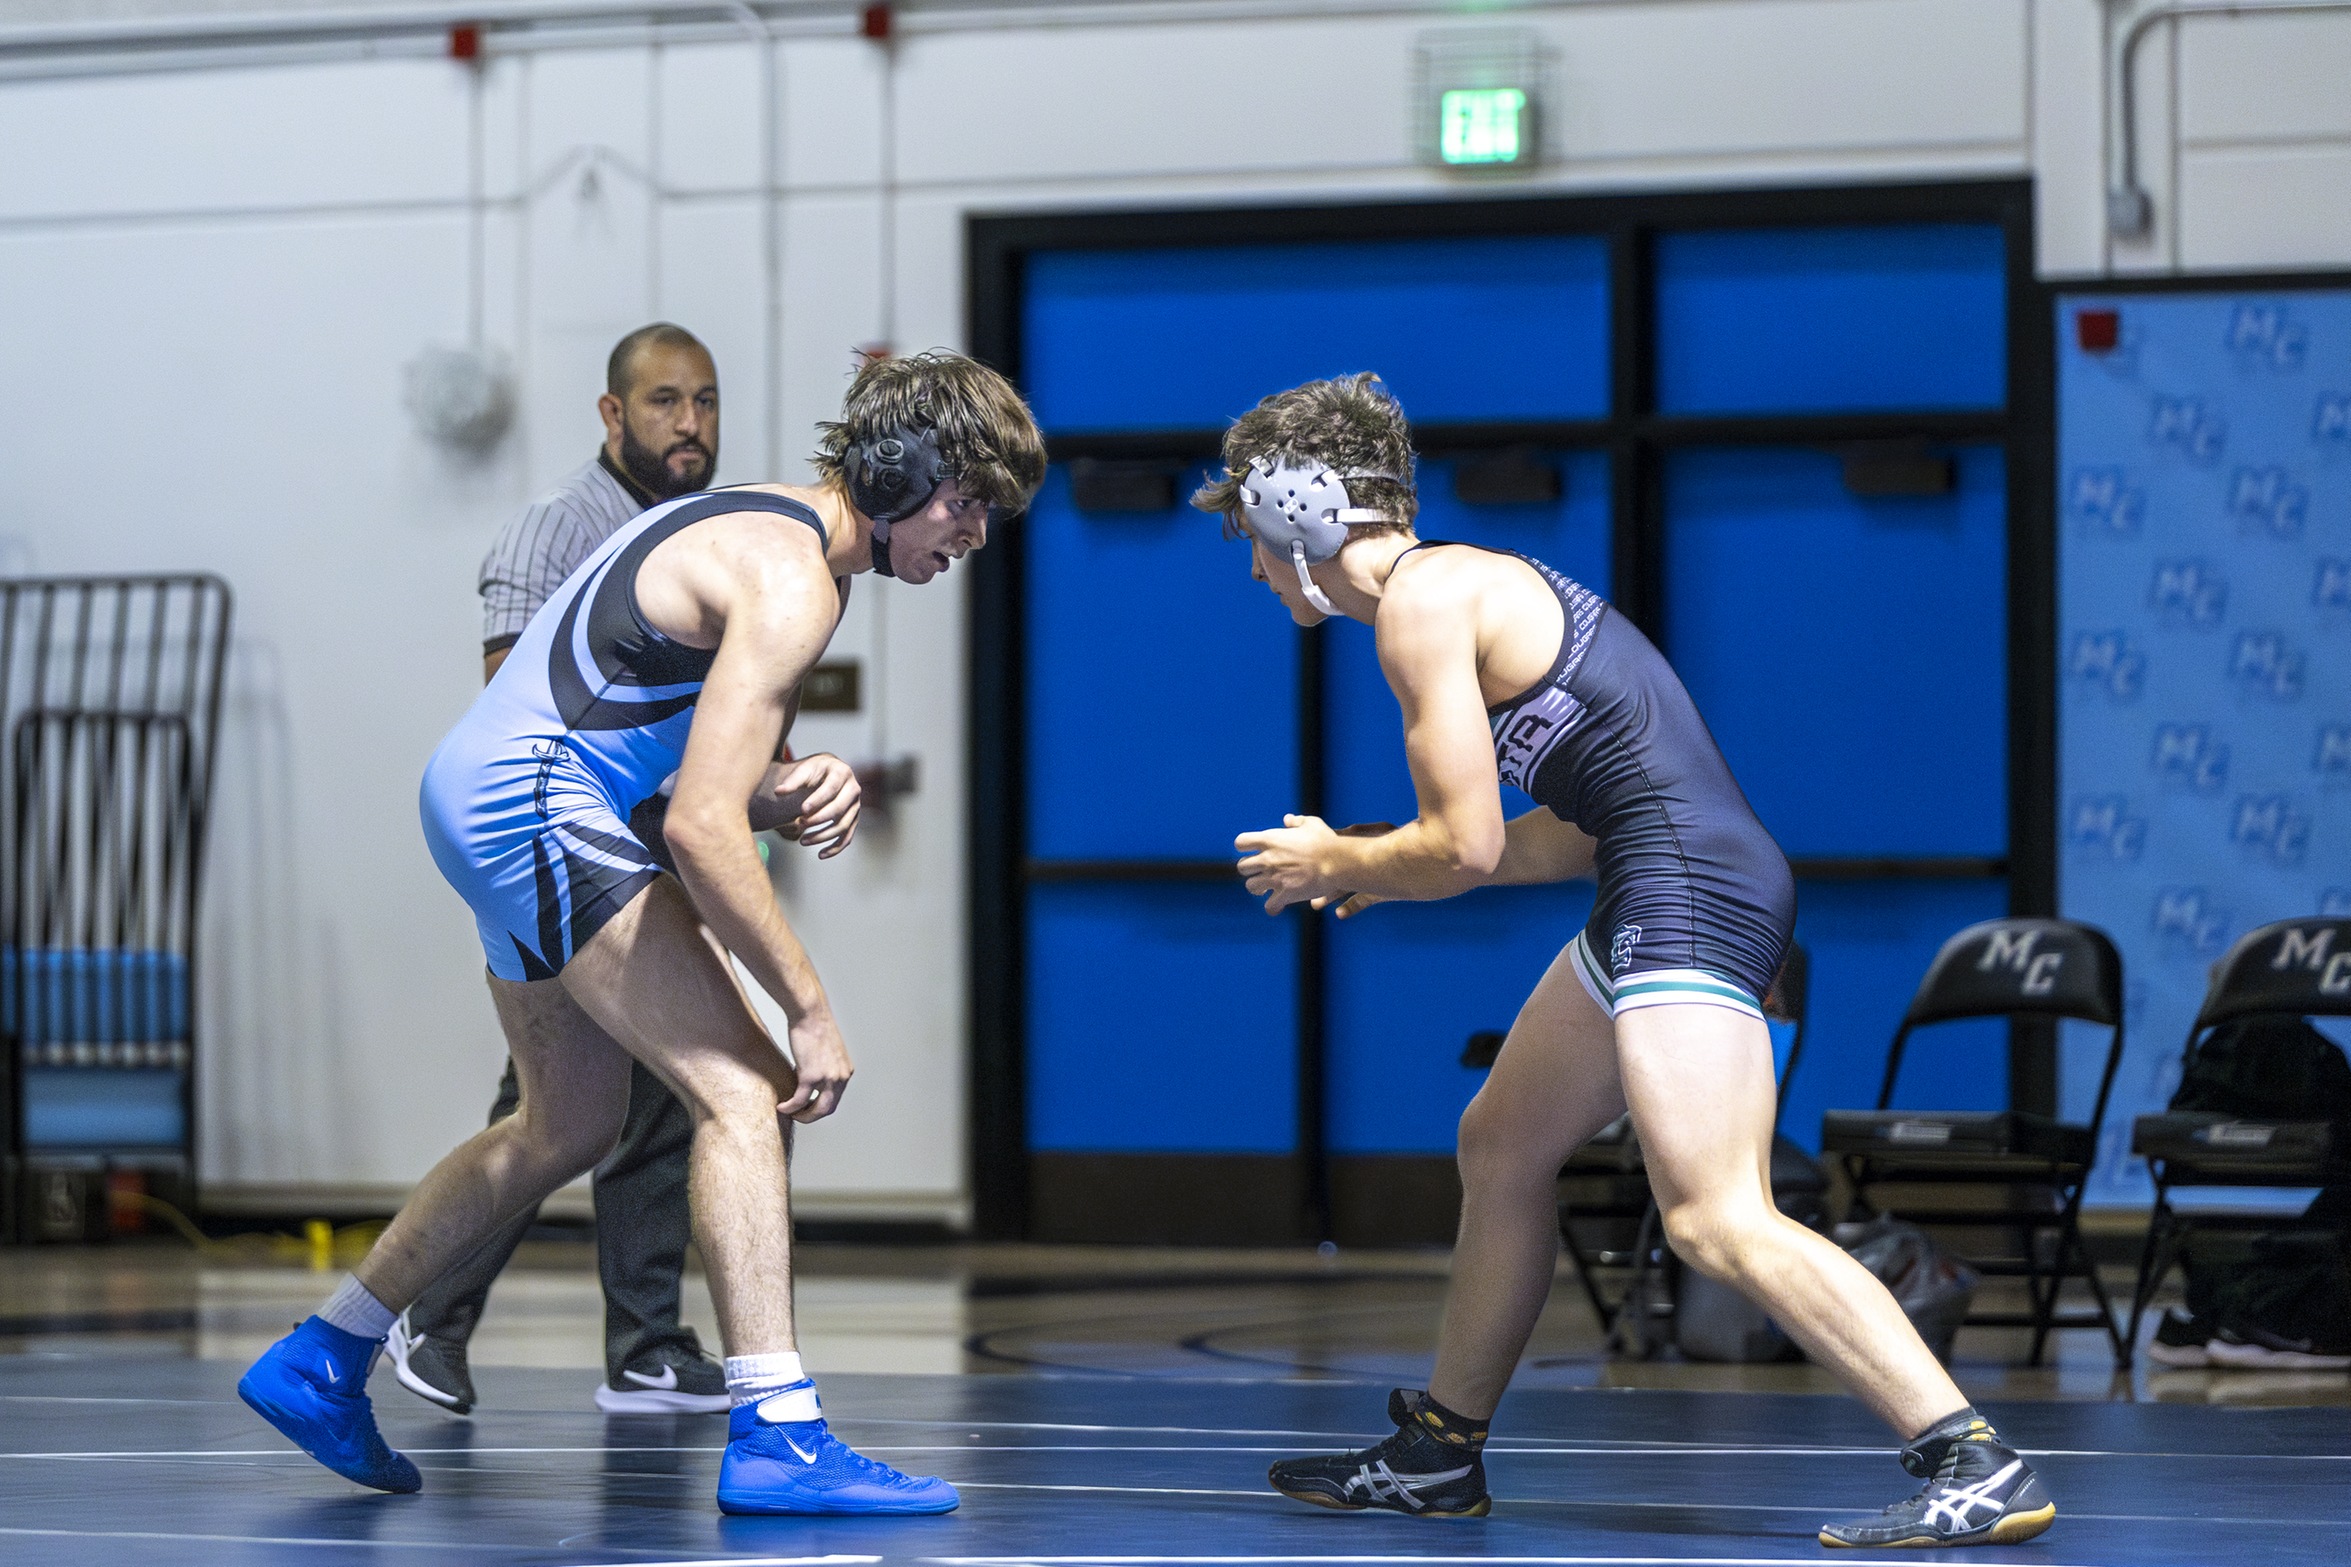 Wrestlers face off during match